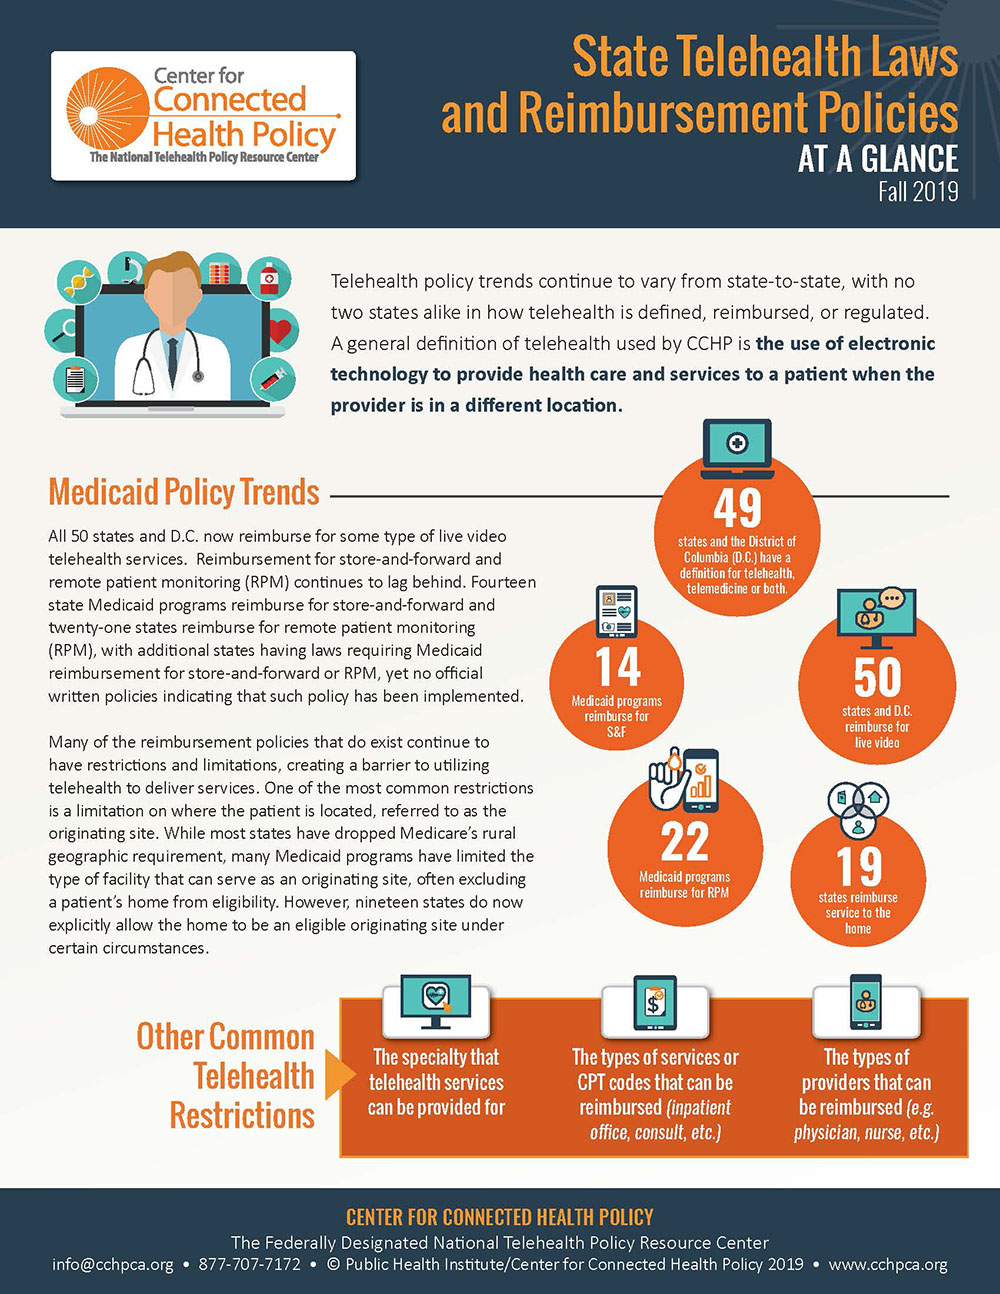 Flyer for Center for Connected Health Policy